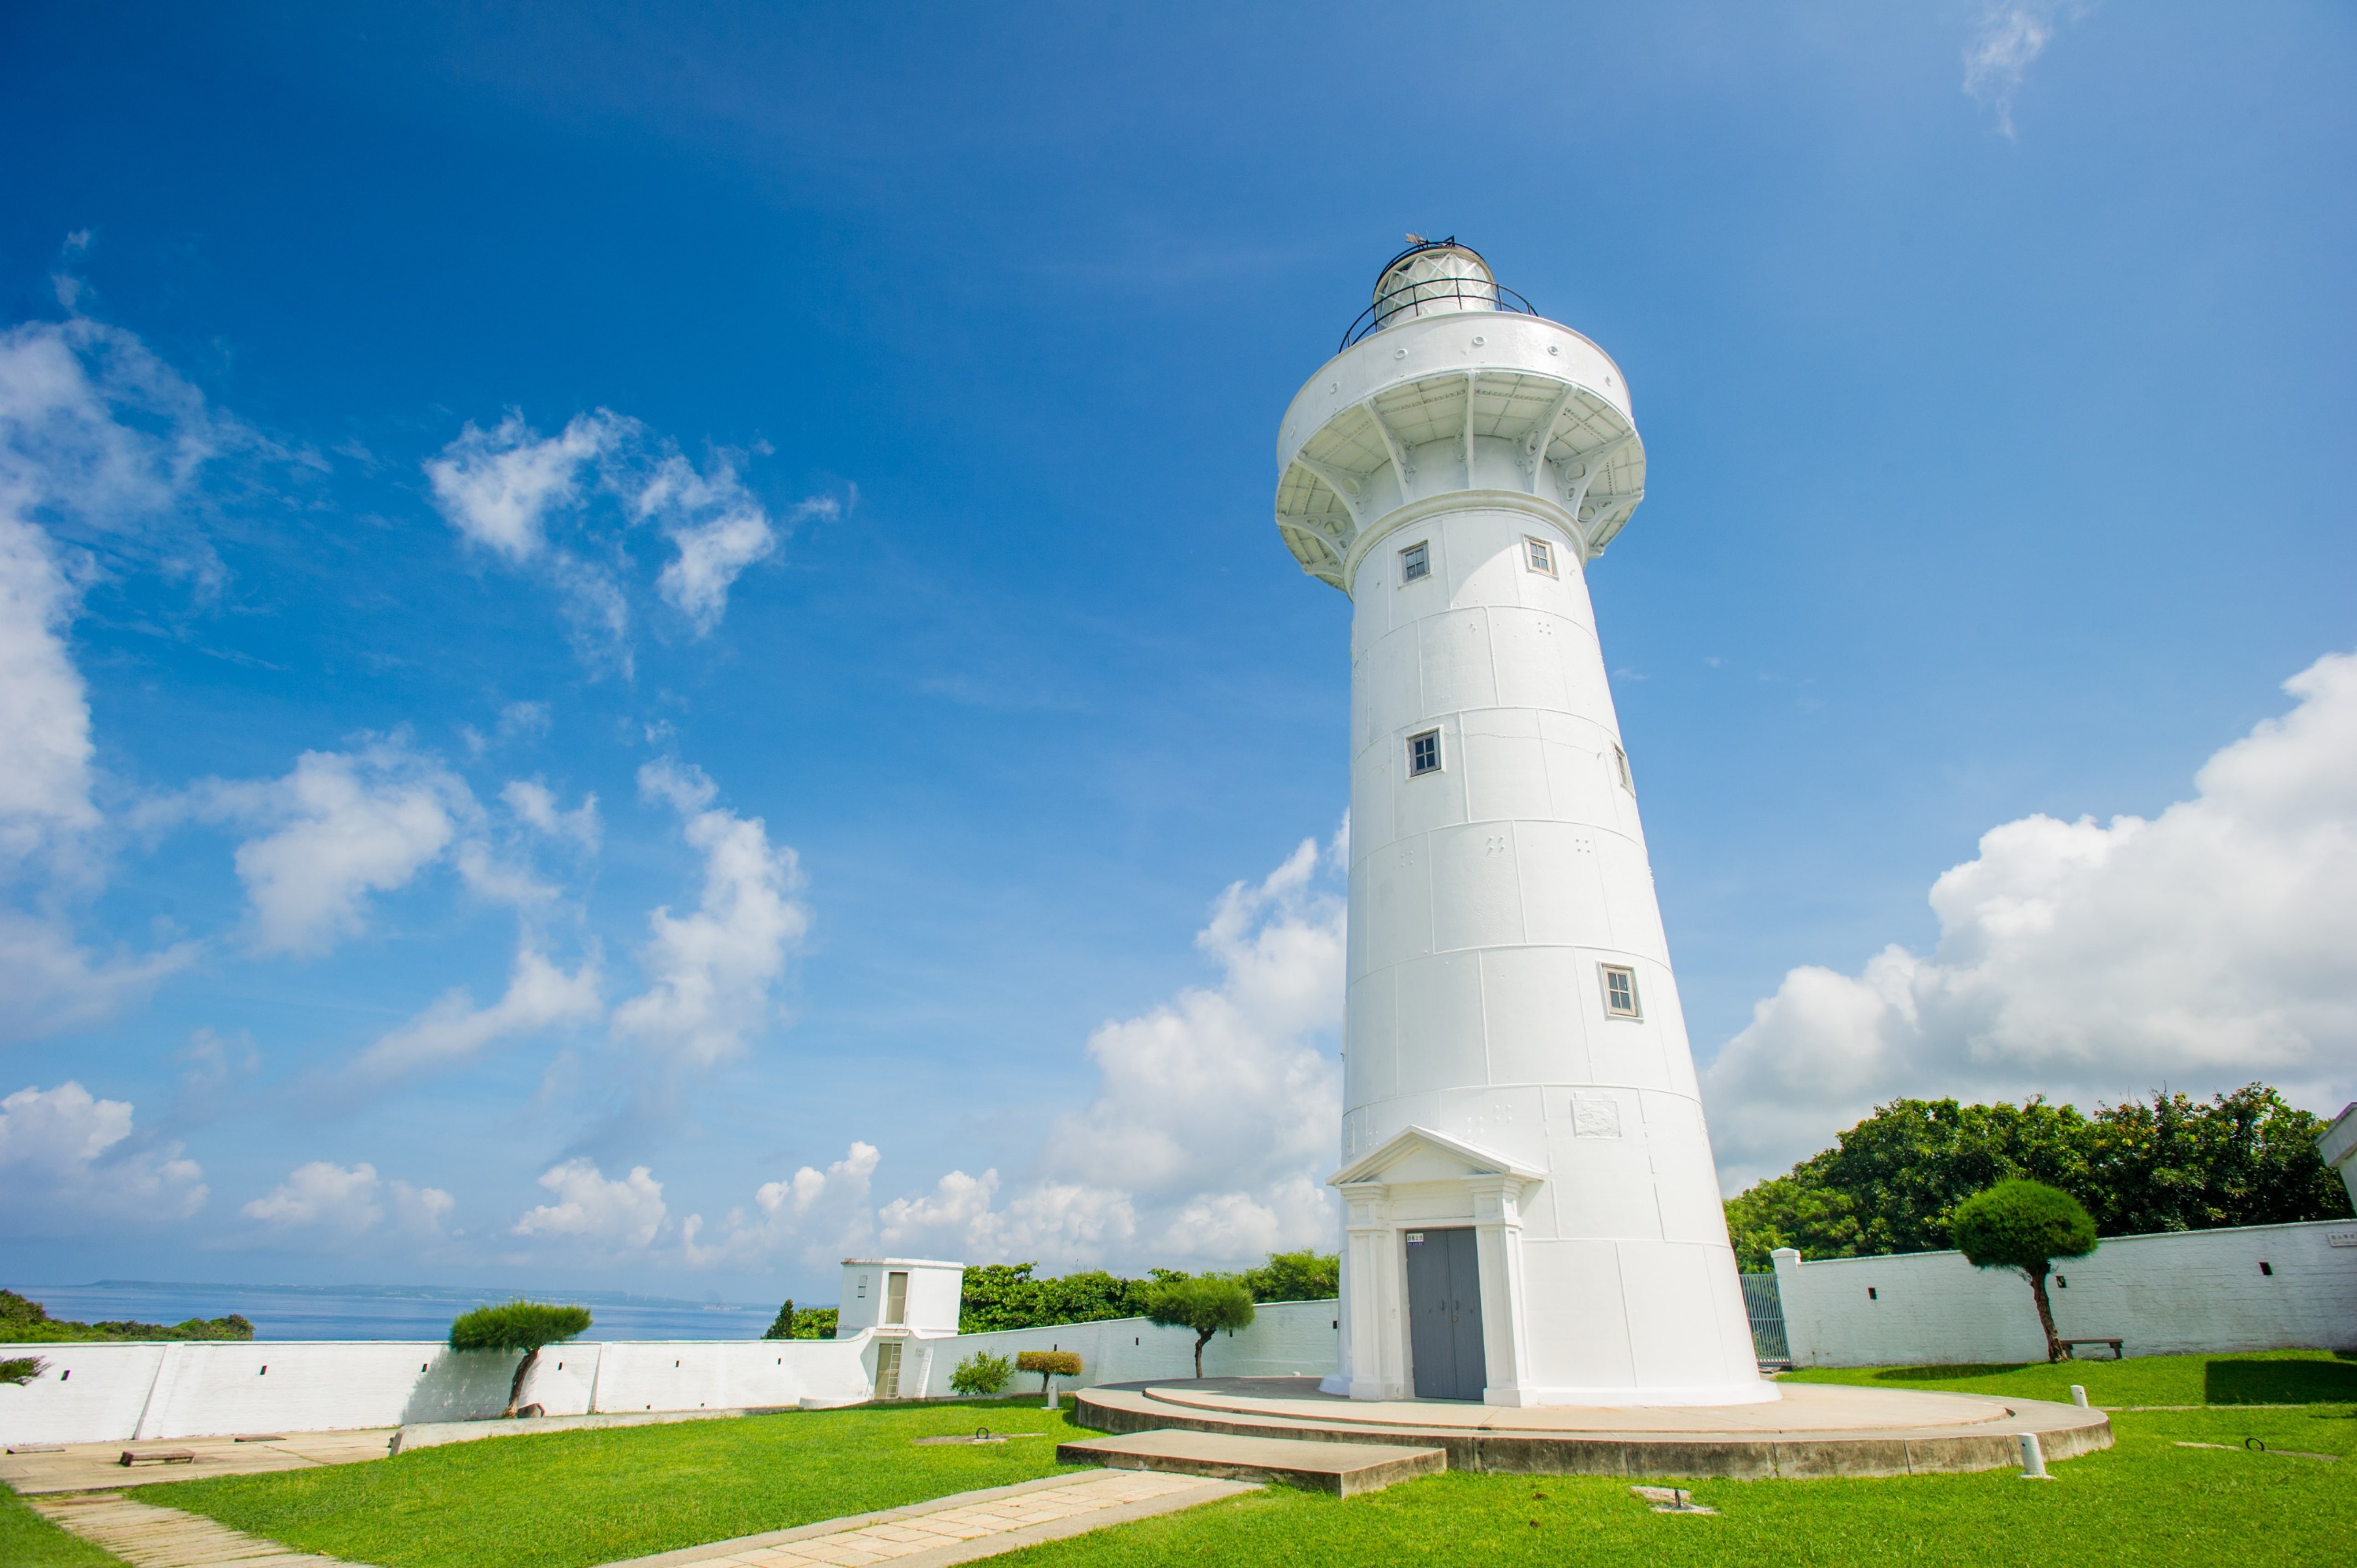 Kenting Popular Attractions Charter Day Tour from Kaohsiung